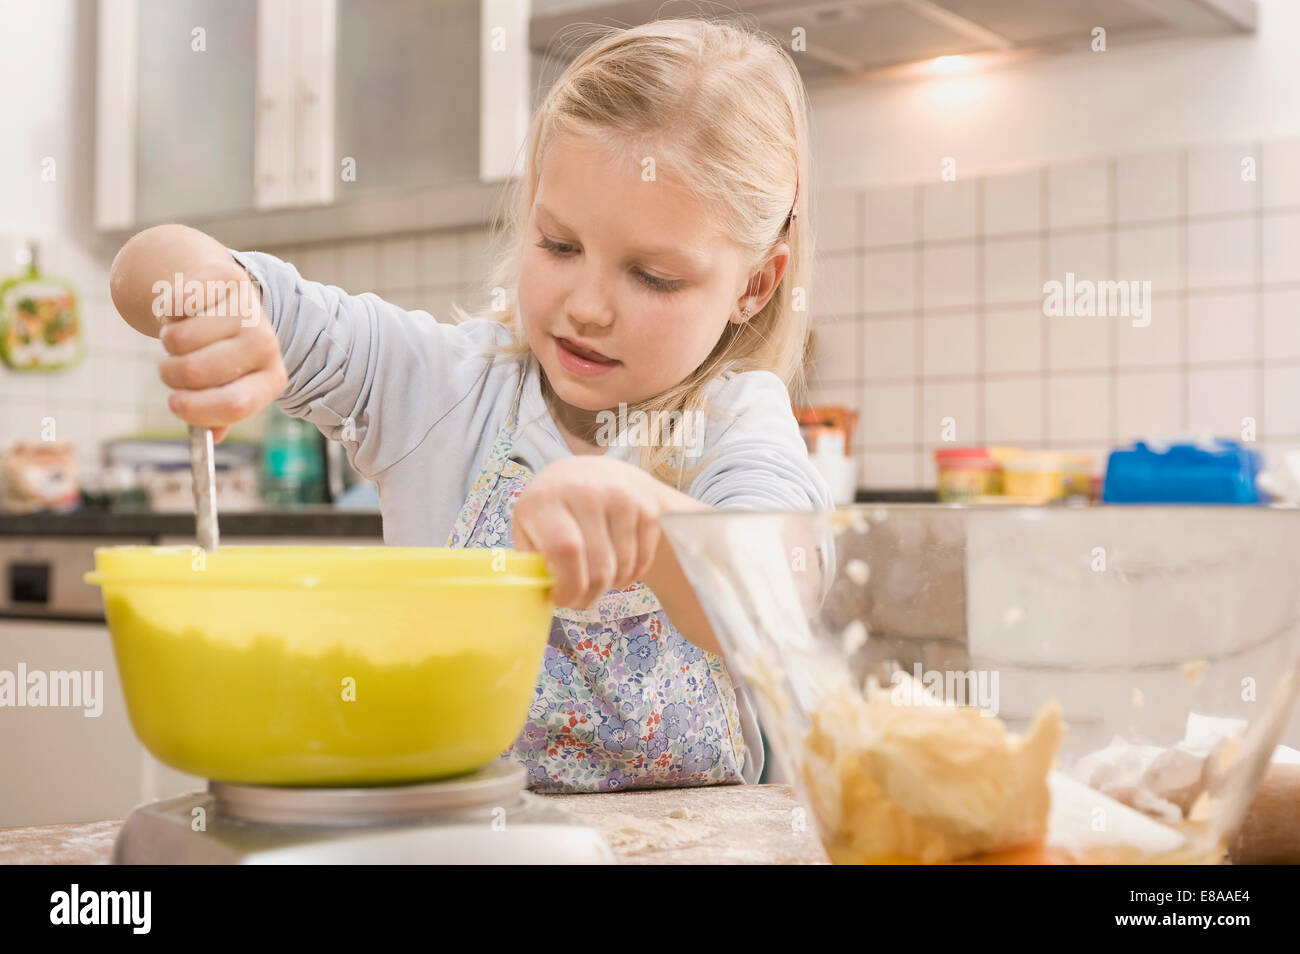 Girl mixing flour in bowl for cookies Stock Photo